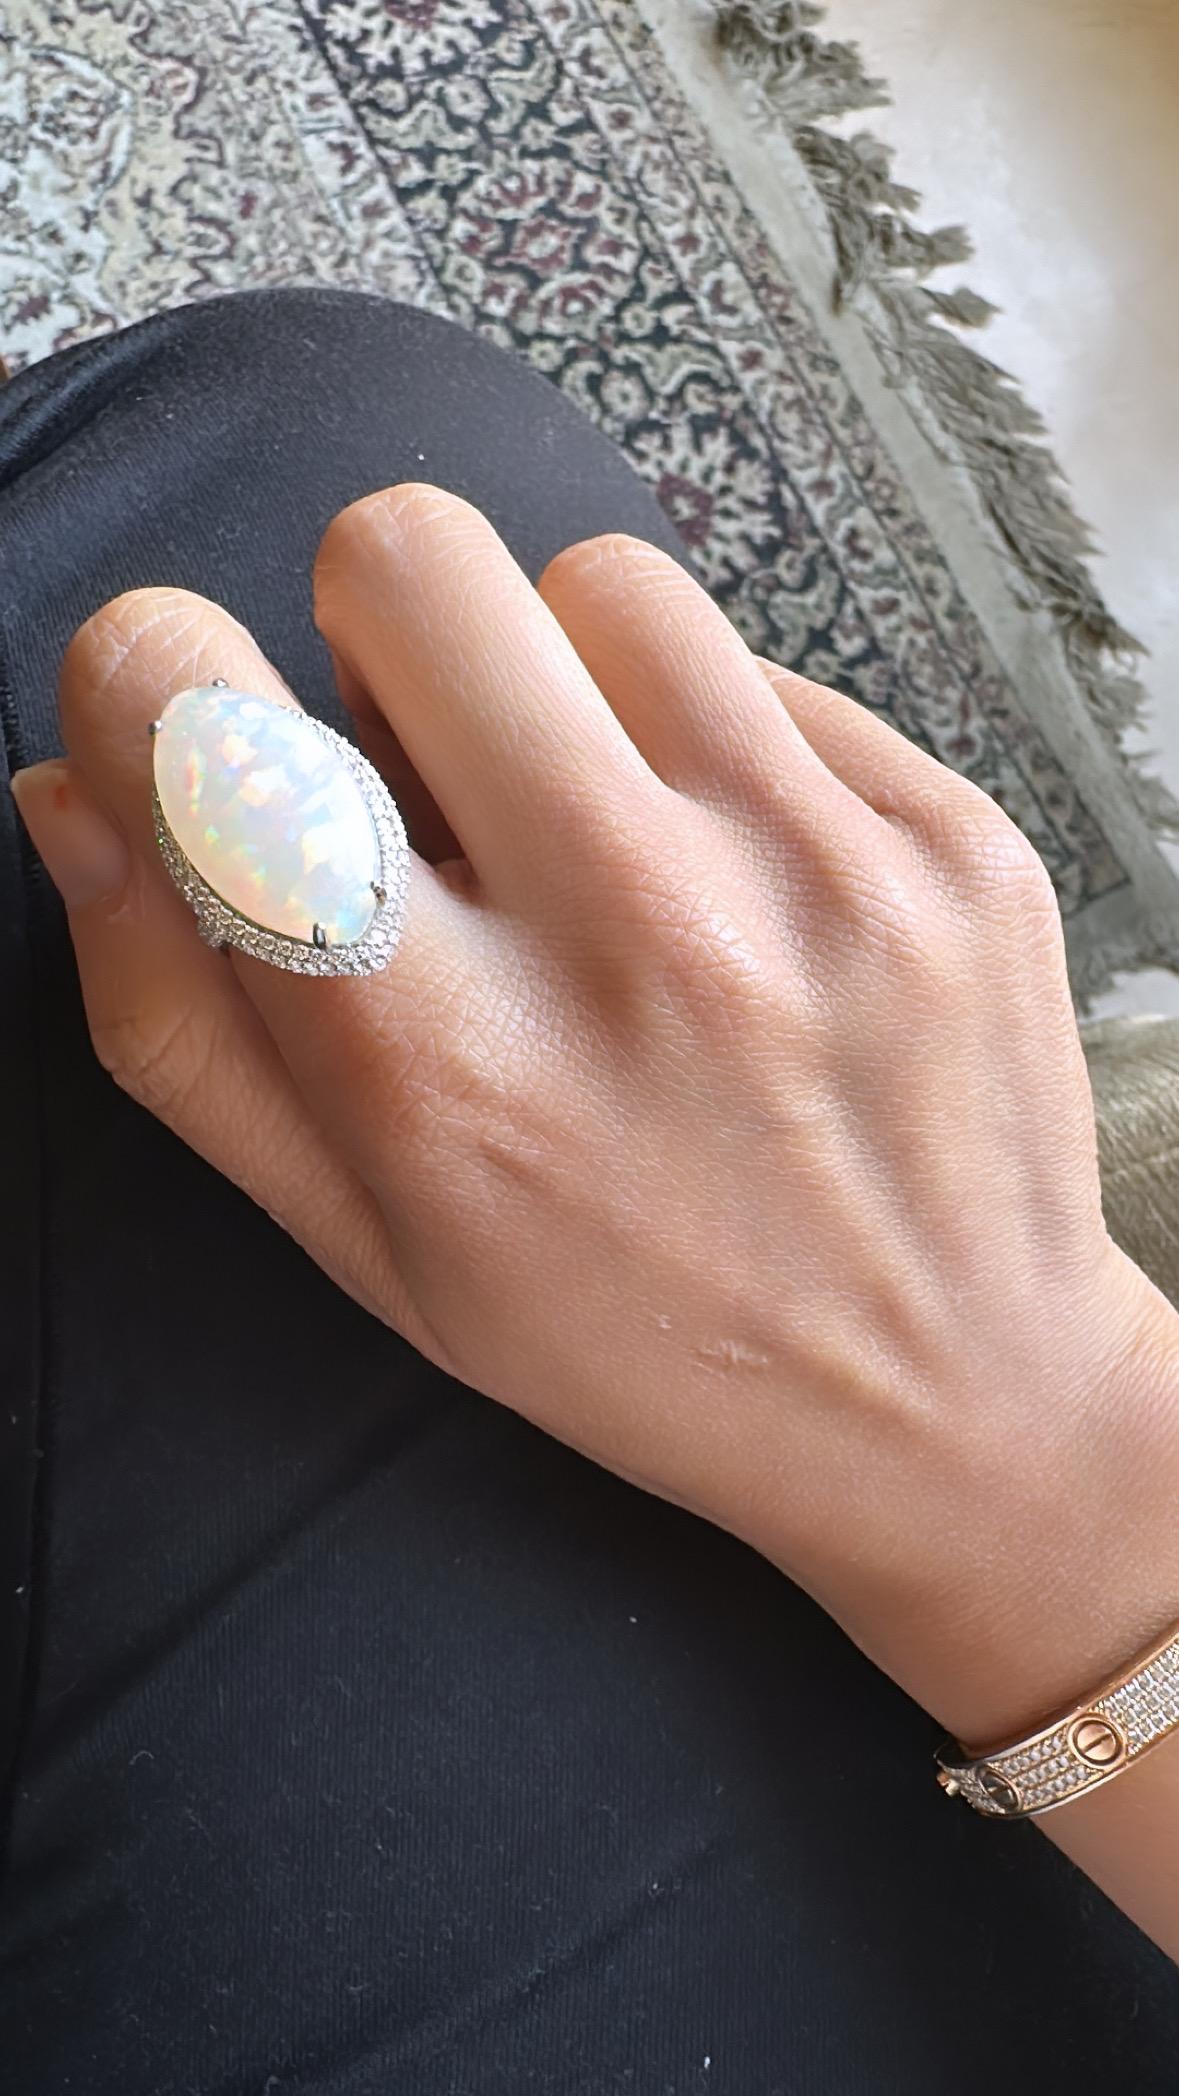 Cabochon Set in 18K Gold, 16.01 carats, Ethiopian Opal & Diamonds Dome Cocktail Ring For Sale